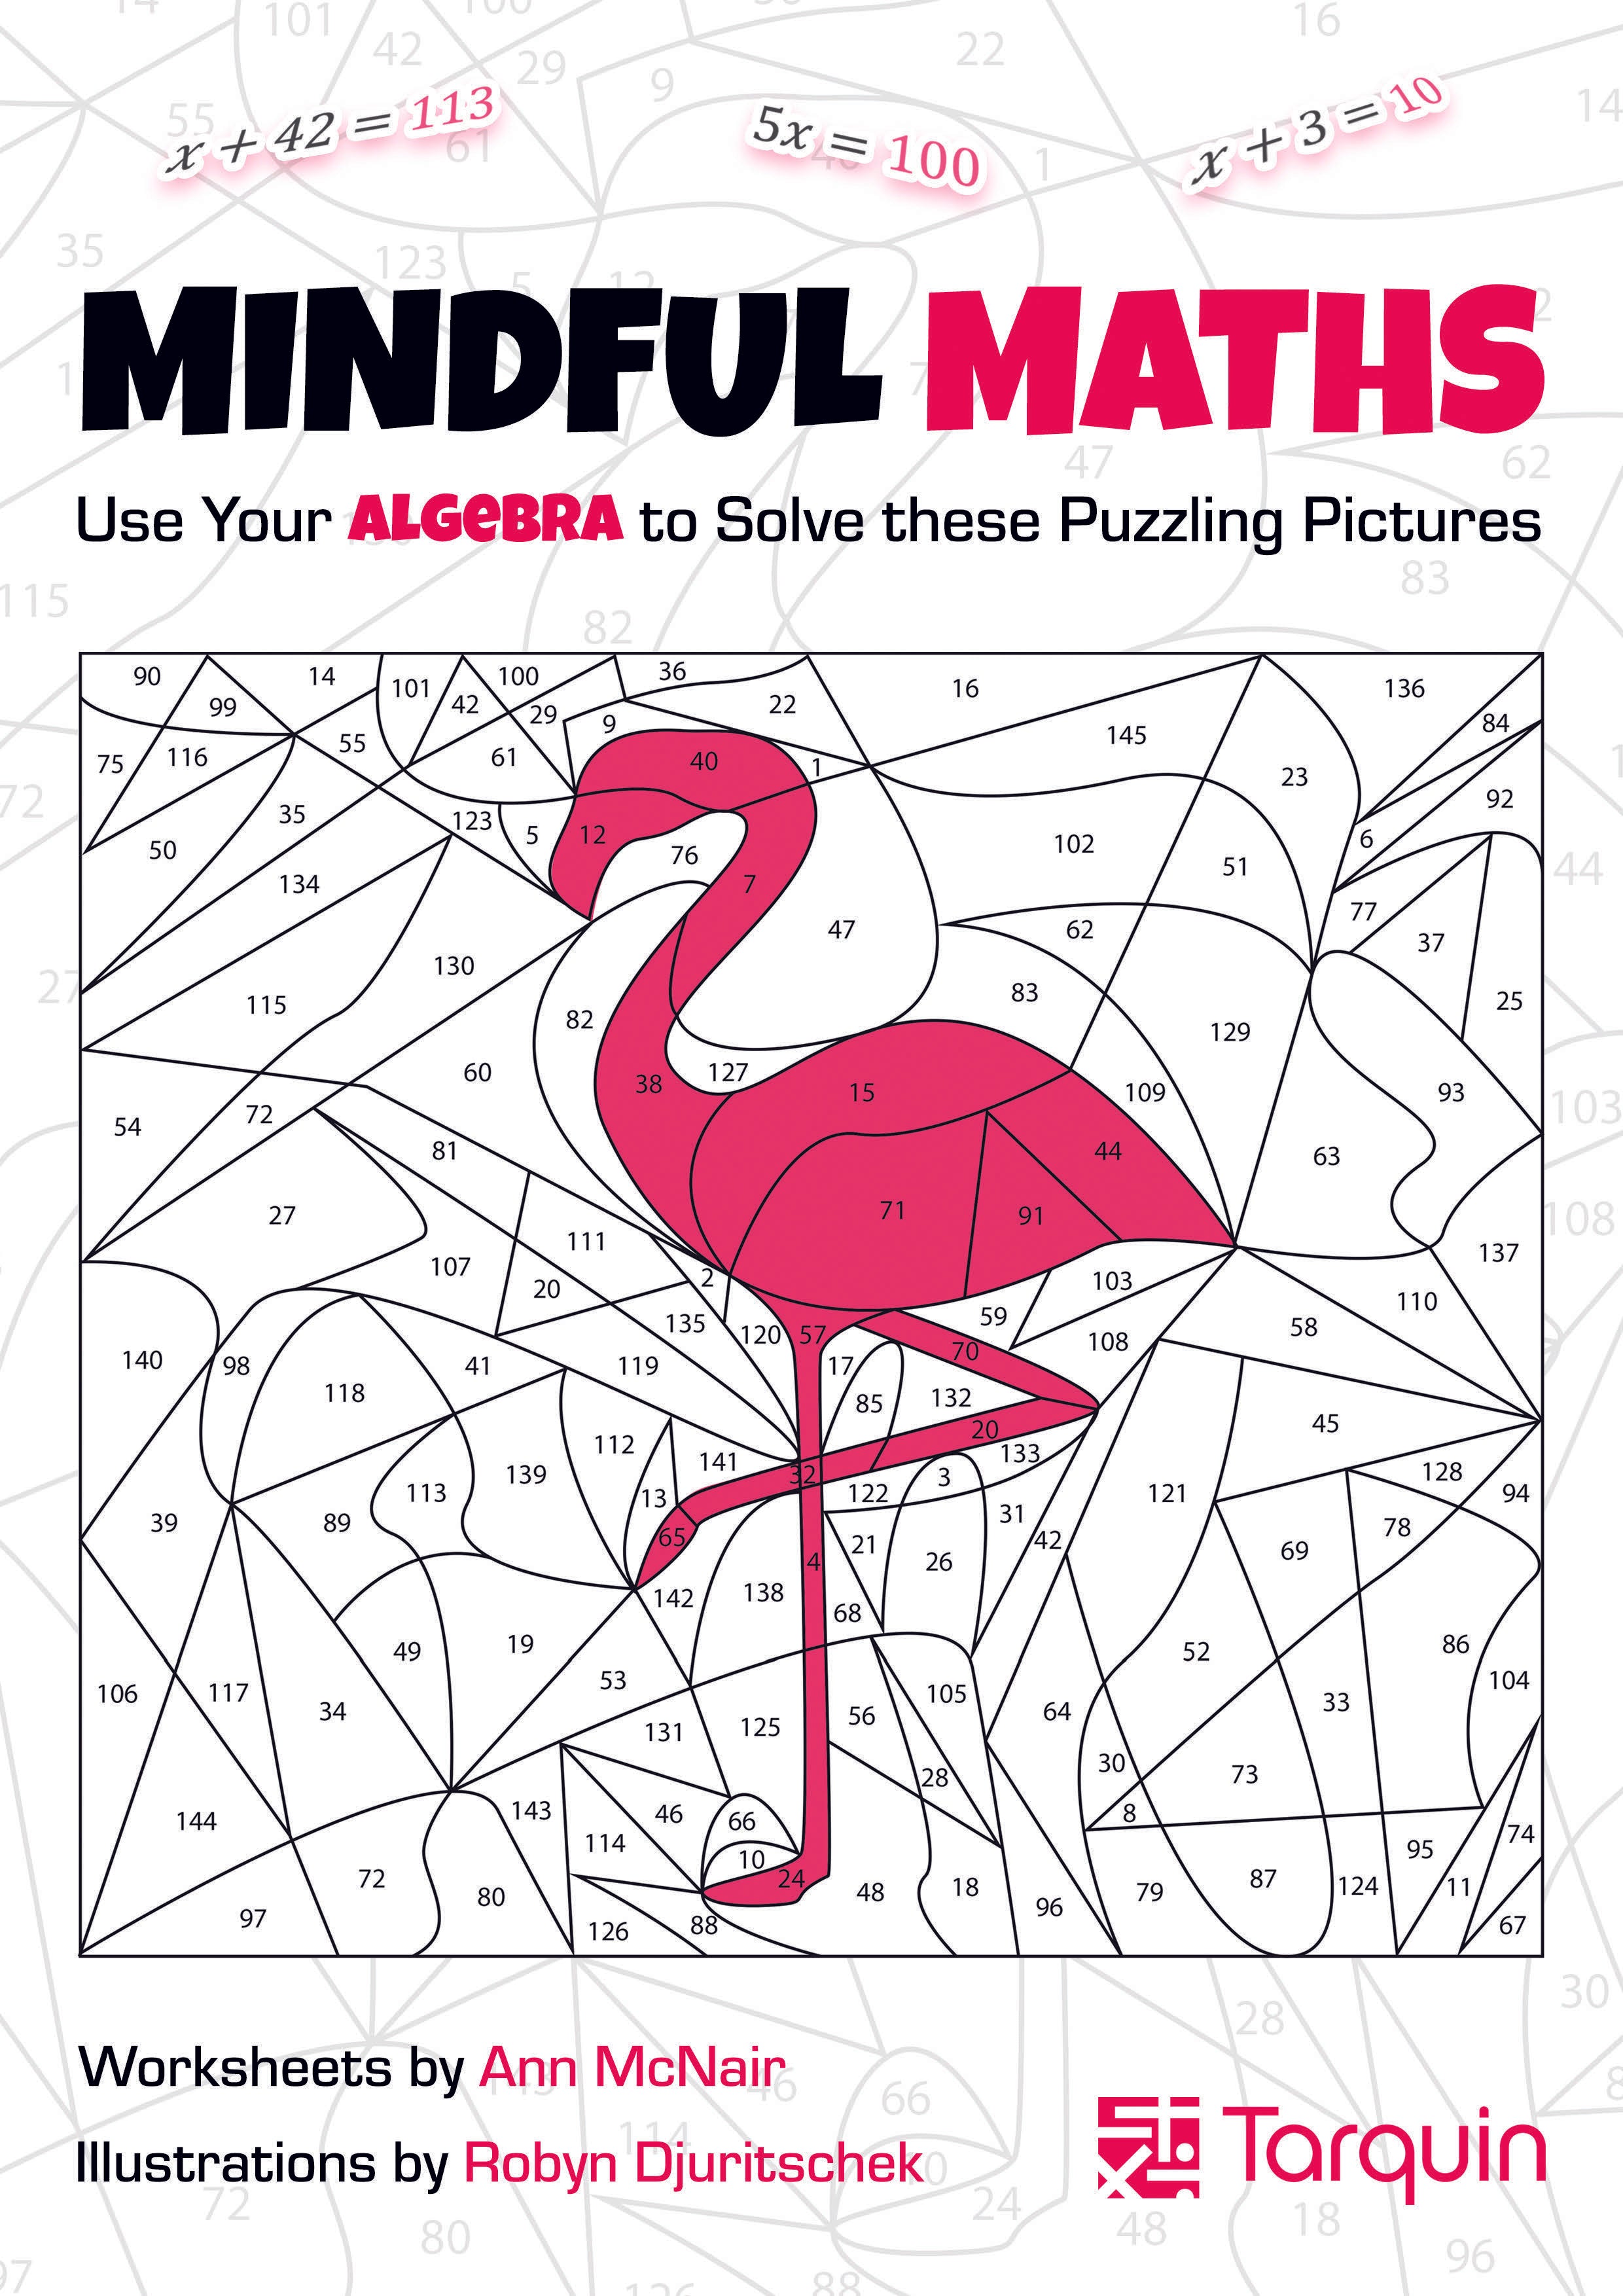 Mindful Maths - Use Your Algebra to Solve these Puzzling Pictures